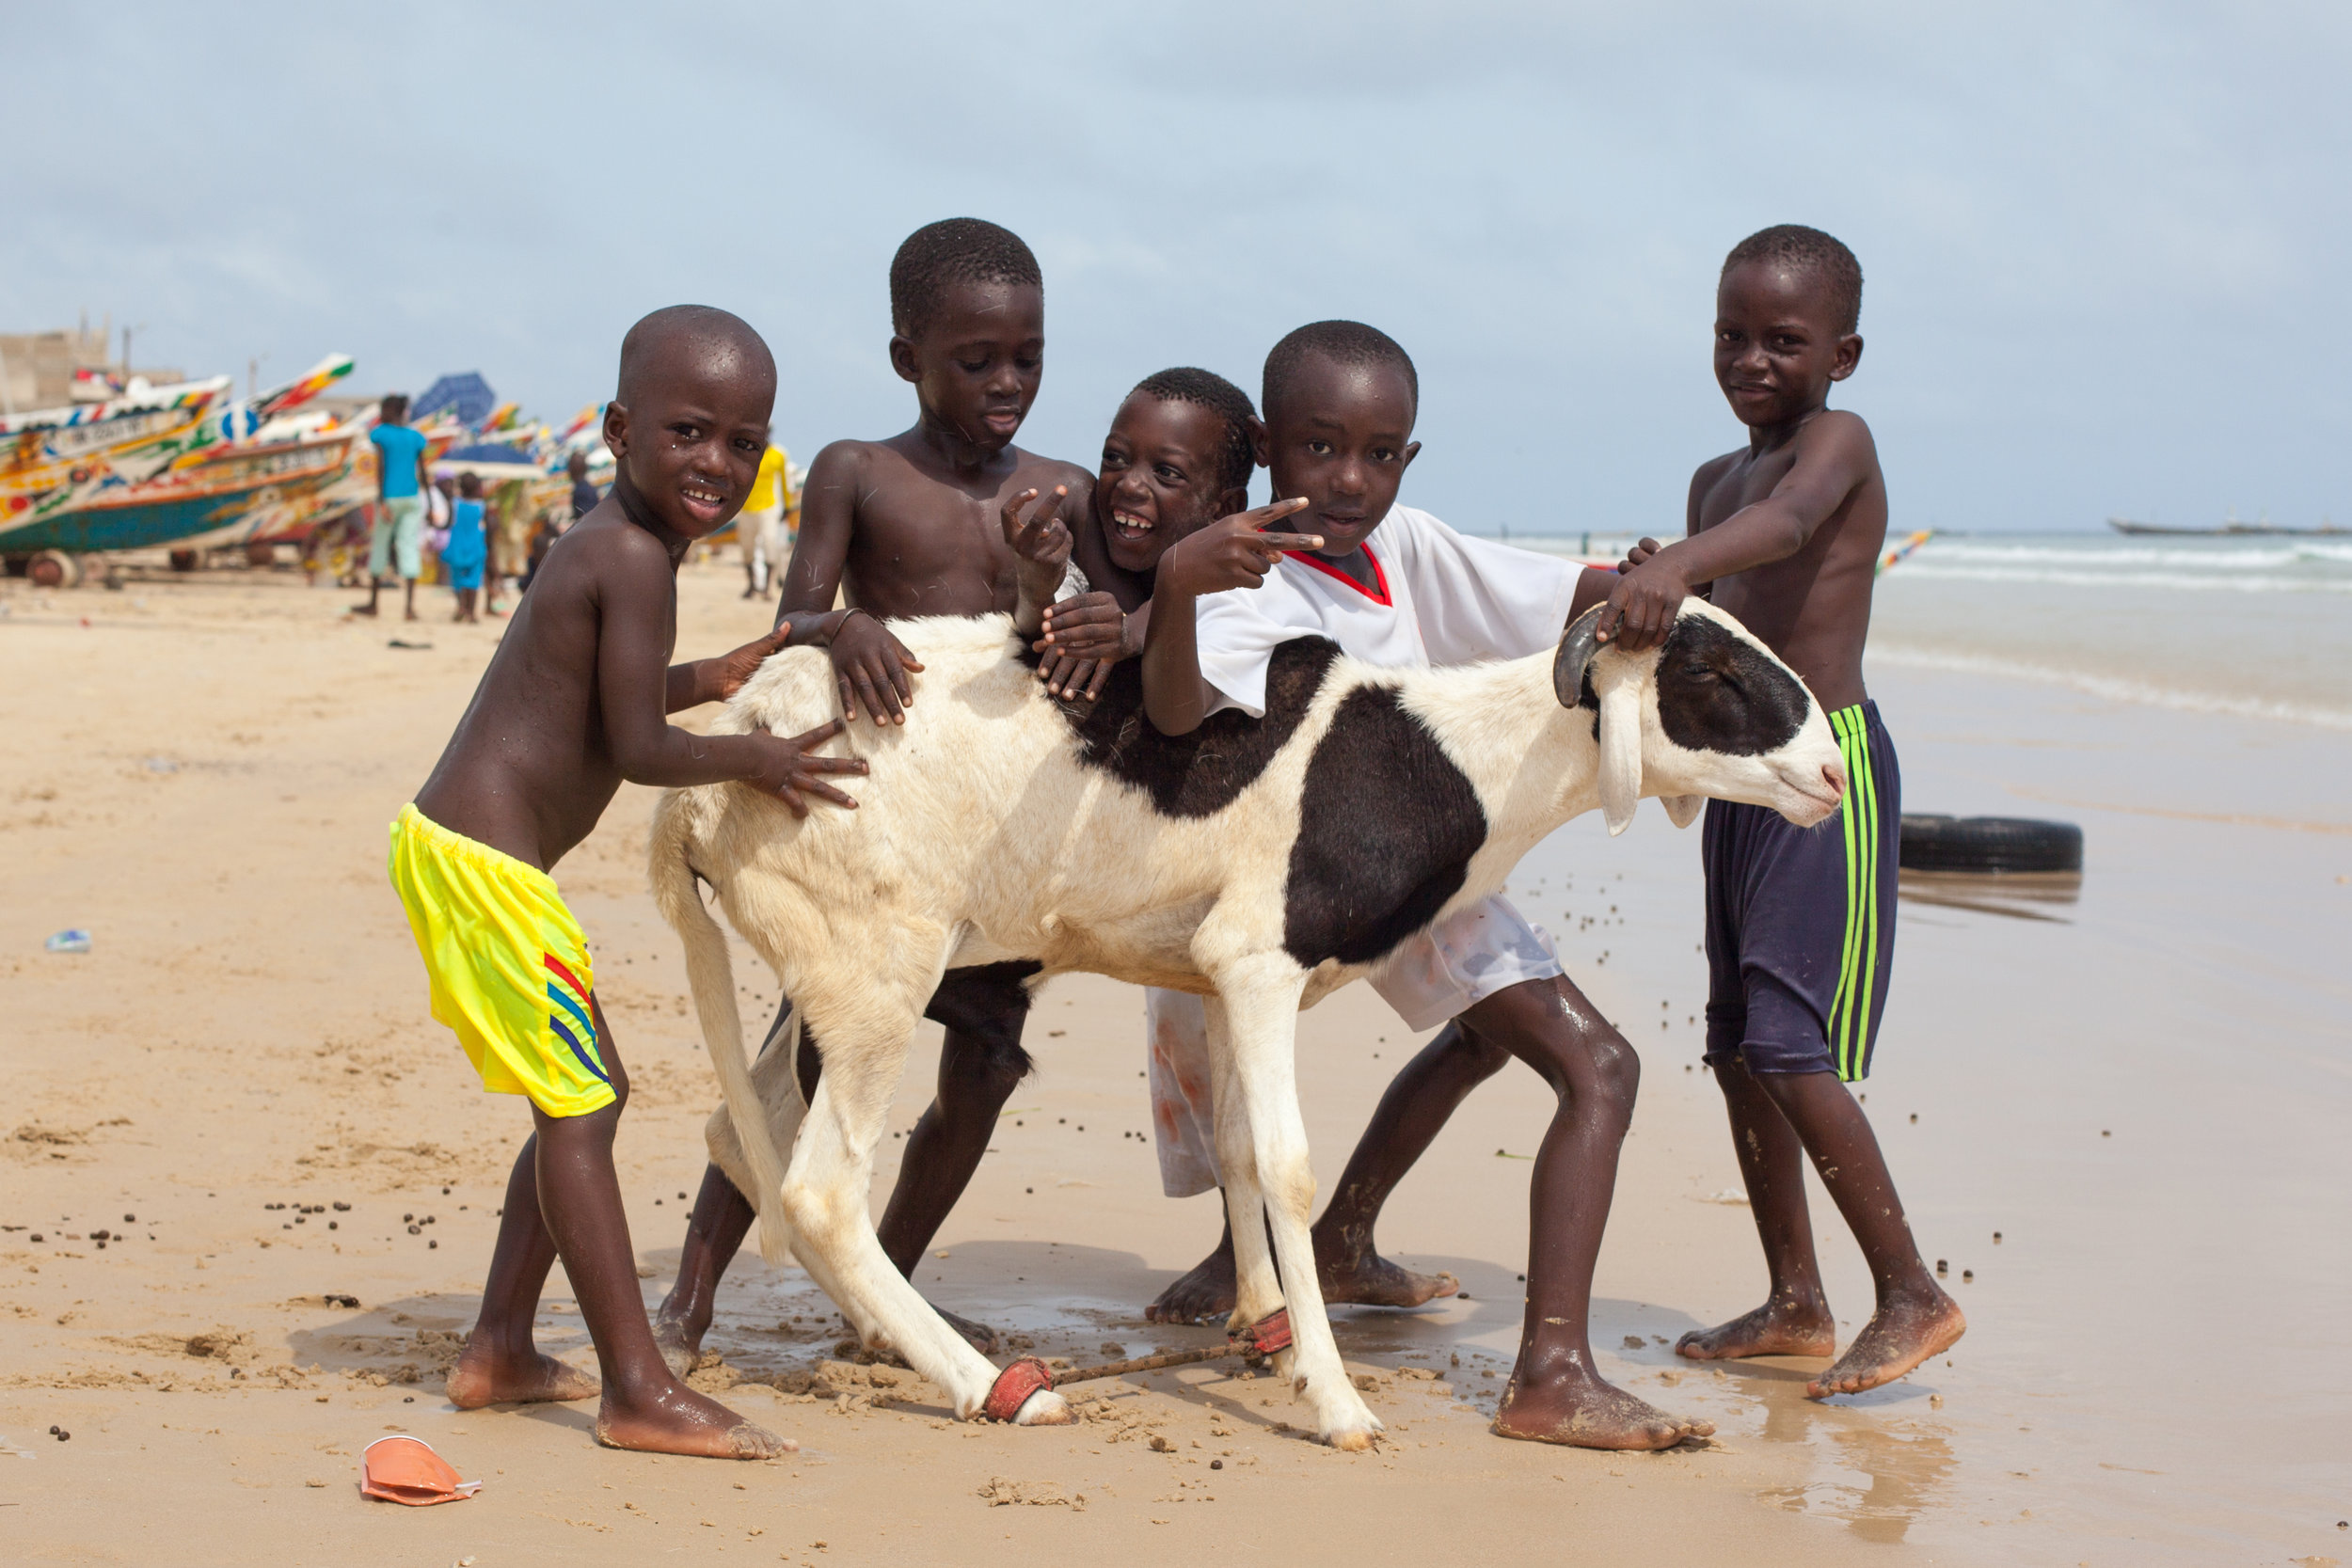 Children pose for a photo with a sheep before the Tabaski Festival on a beach in Dakar, Senegal.